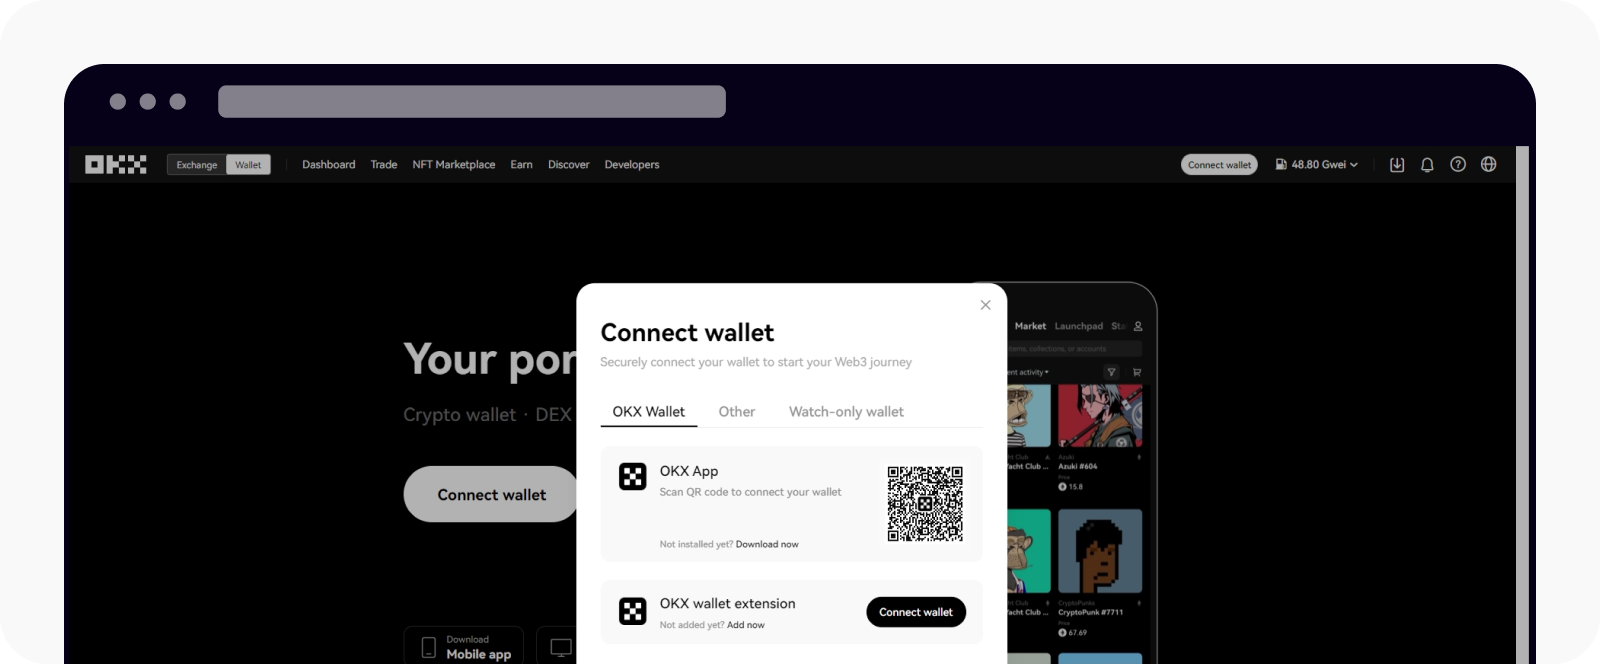 Select Wallet at the top left corner and select Connect wallet to start